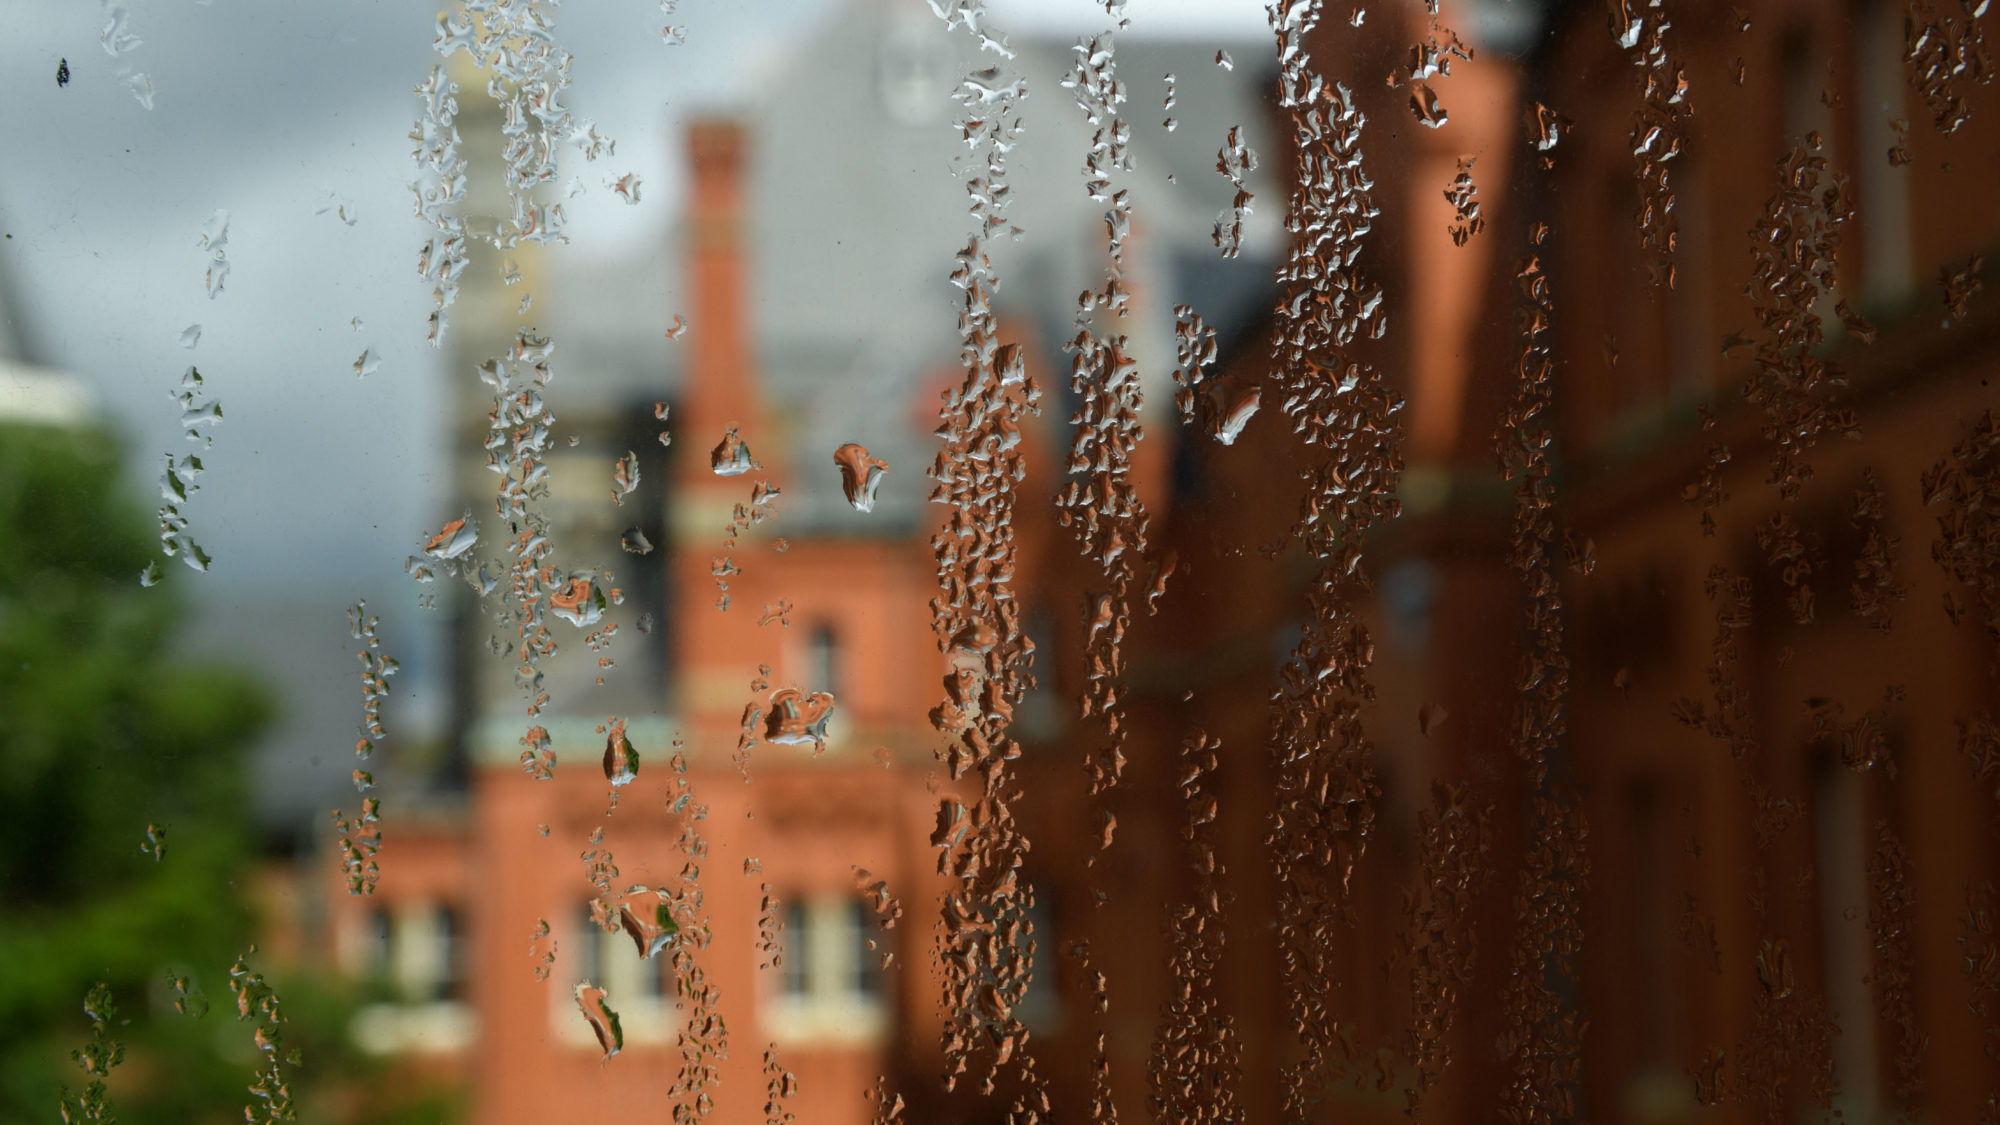 Rain trickles down a window with campus in the background